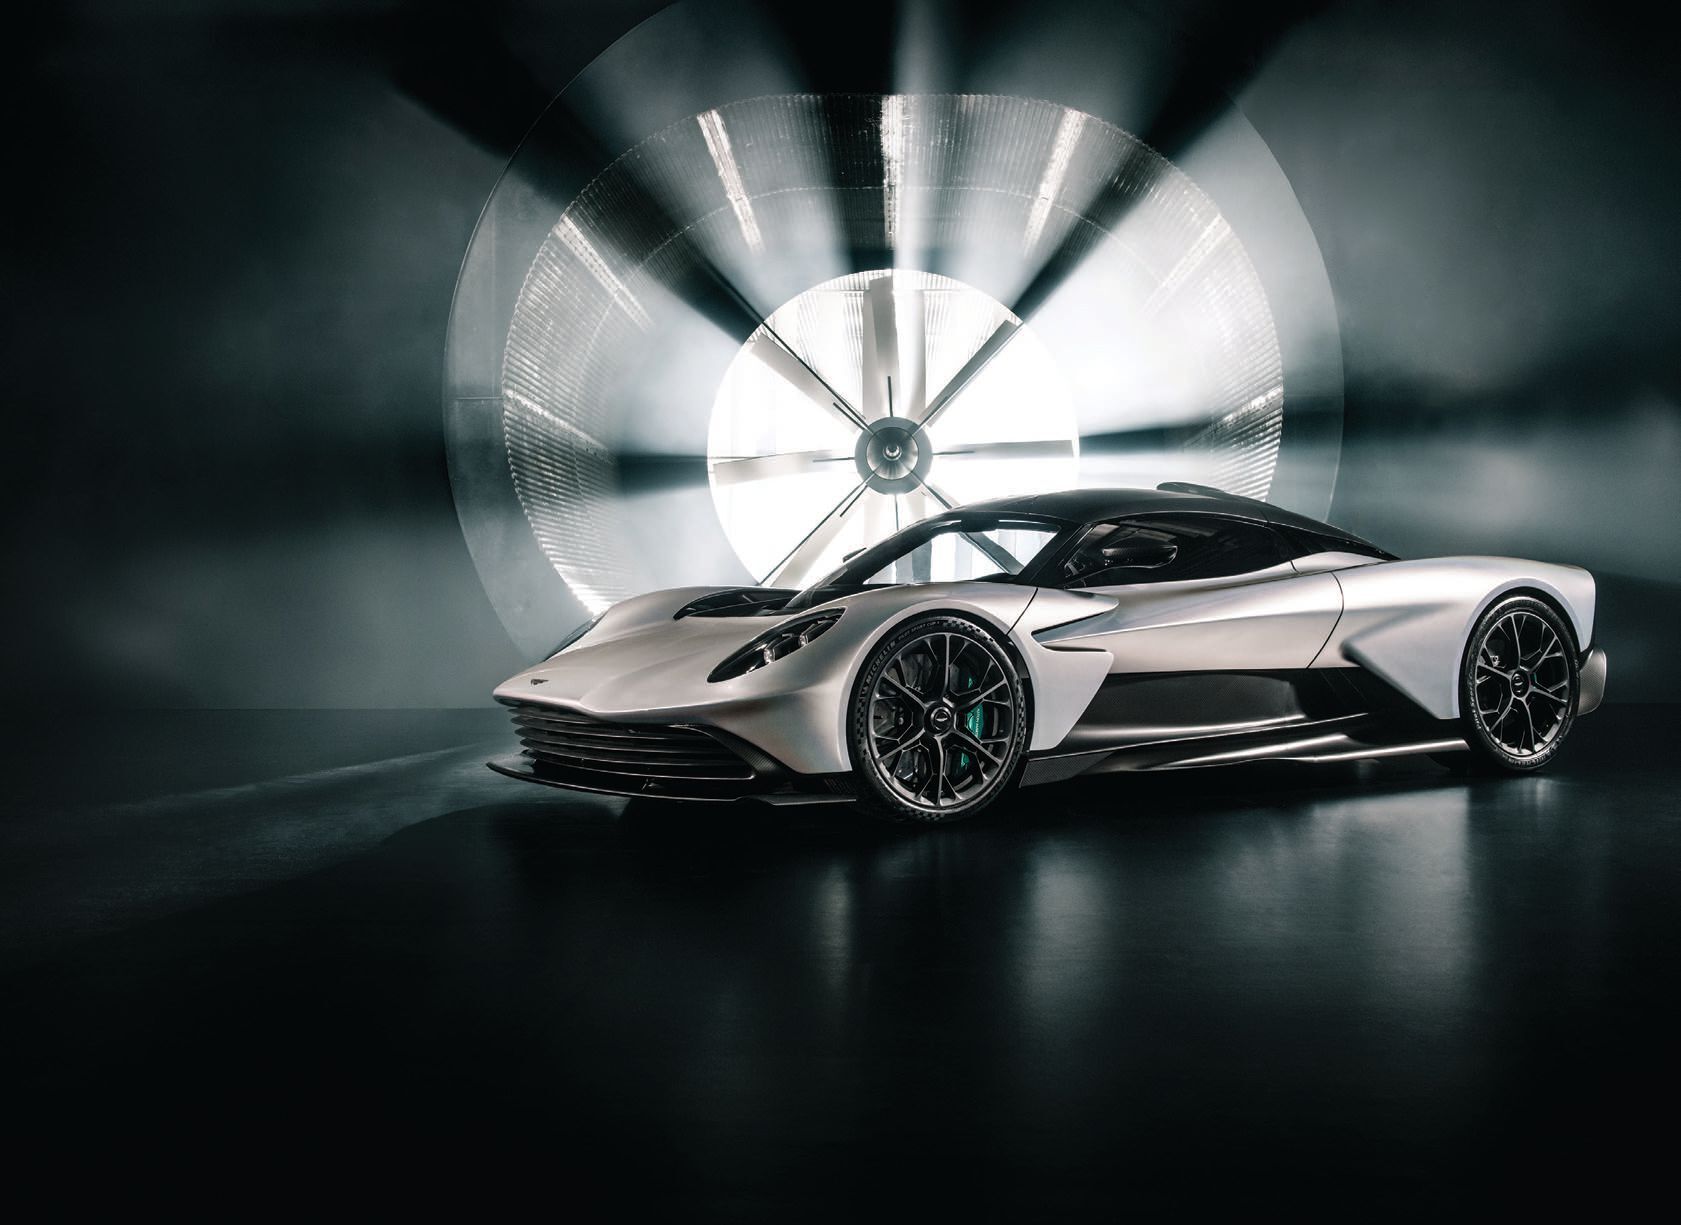 Aston Martin’s first series production mid-engine supercar, the Valhalla will be produced in a limited run of just 999 vehicles. PHOTO COURTESY OF BRANDS